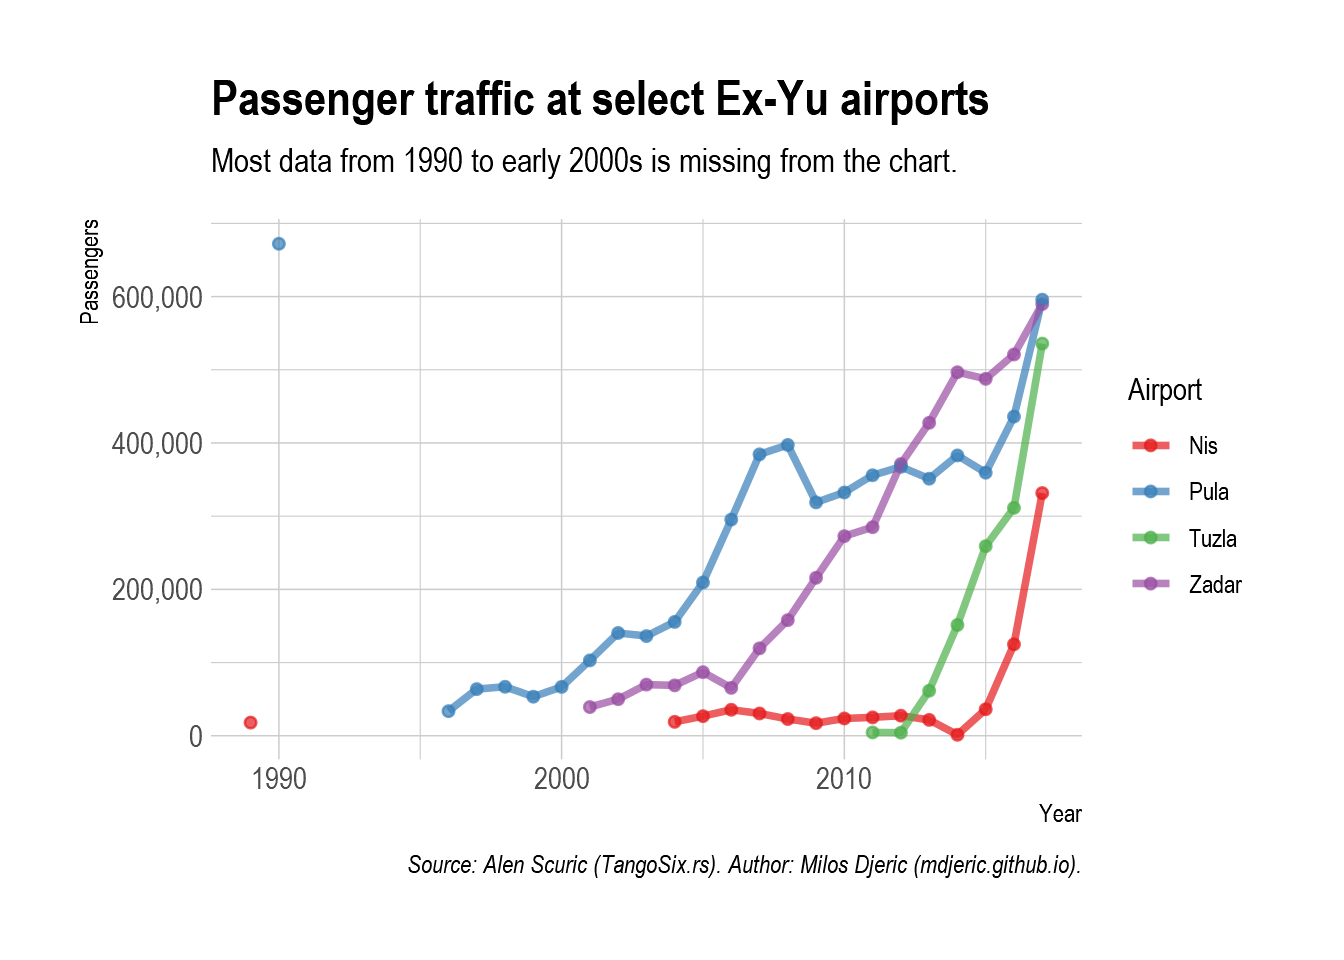 Plot with traffic at Pula rizing from 2000, Zadar rising from 2005, Tuzla rizing from 2012, and all reaching close to 600,000 passengers, along wtih steepest slope of rise Nis airport from 2014